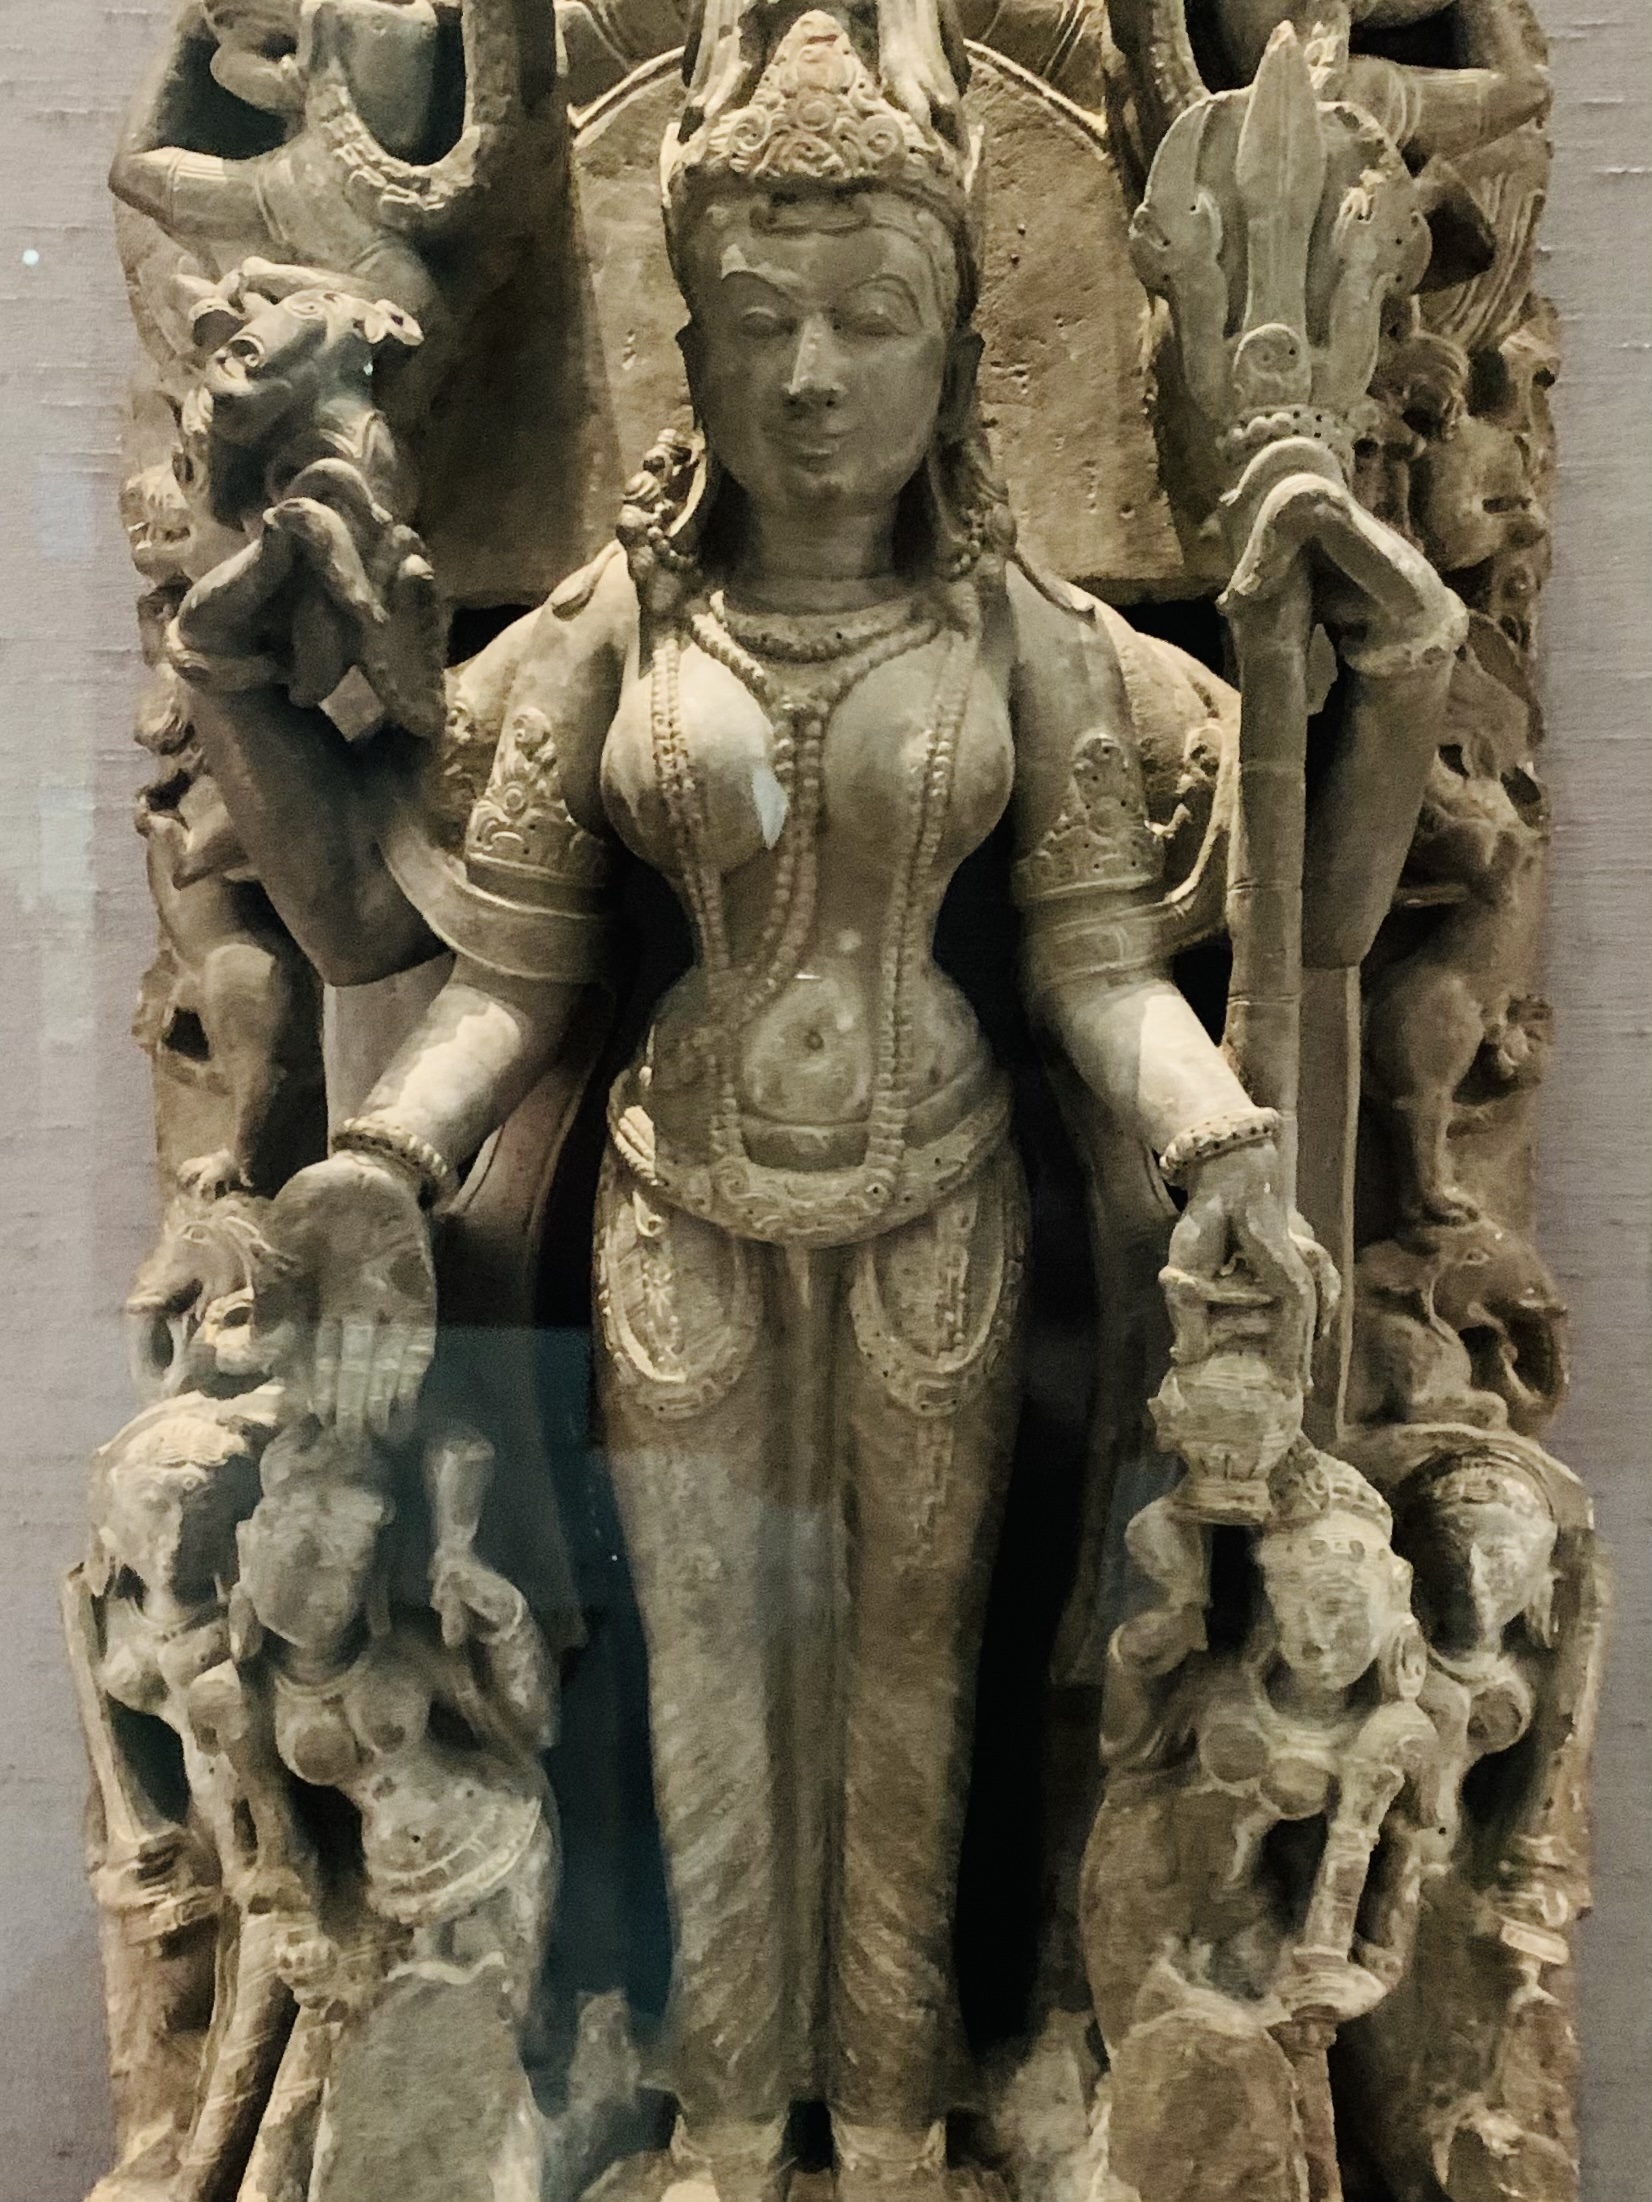 A stone sculpture of the goddess Parvati holding a trident and rosary.